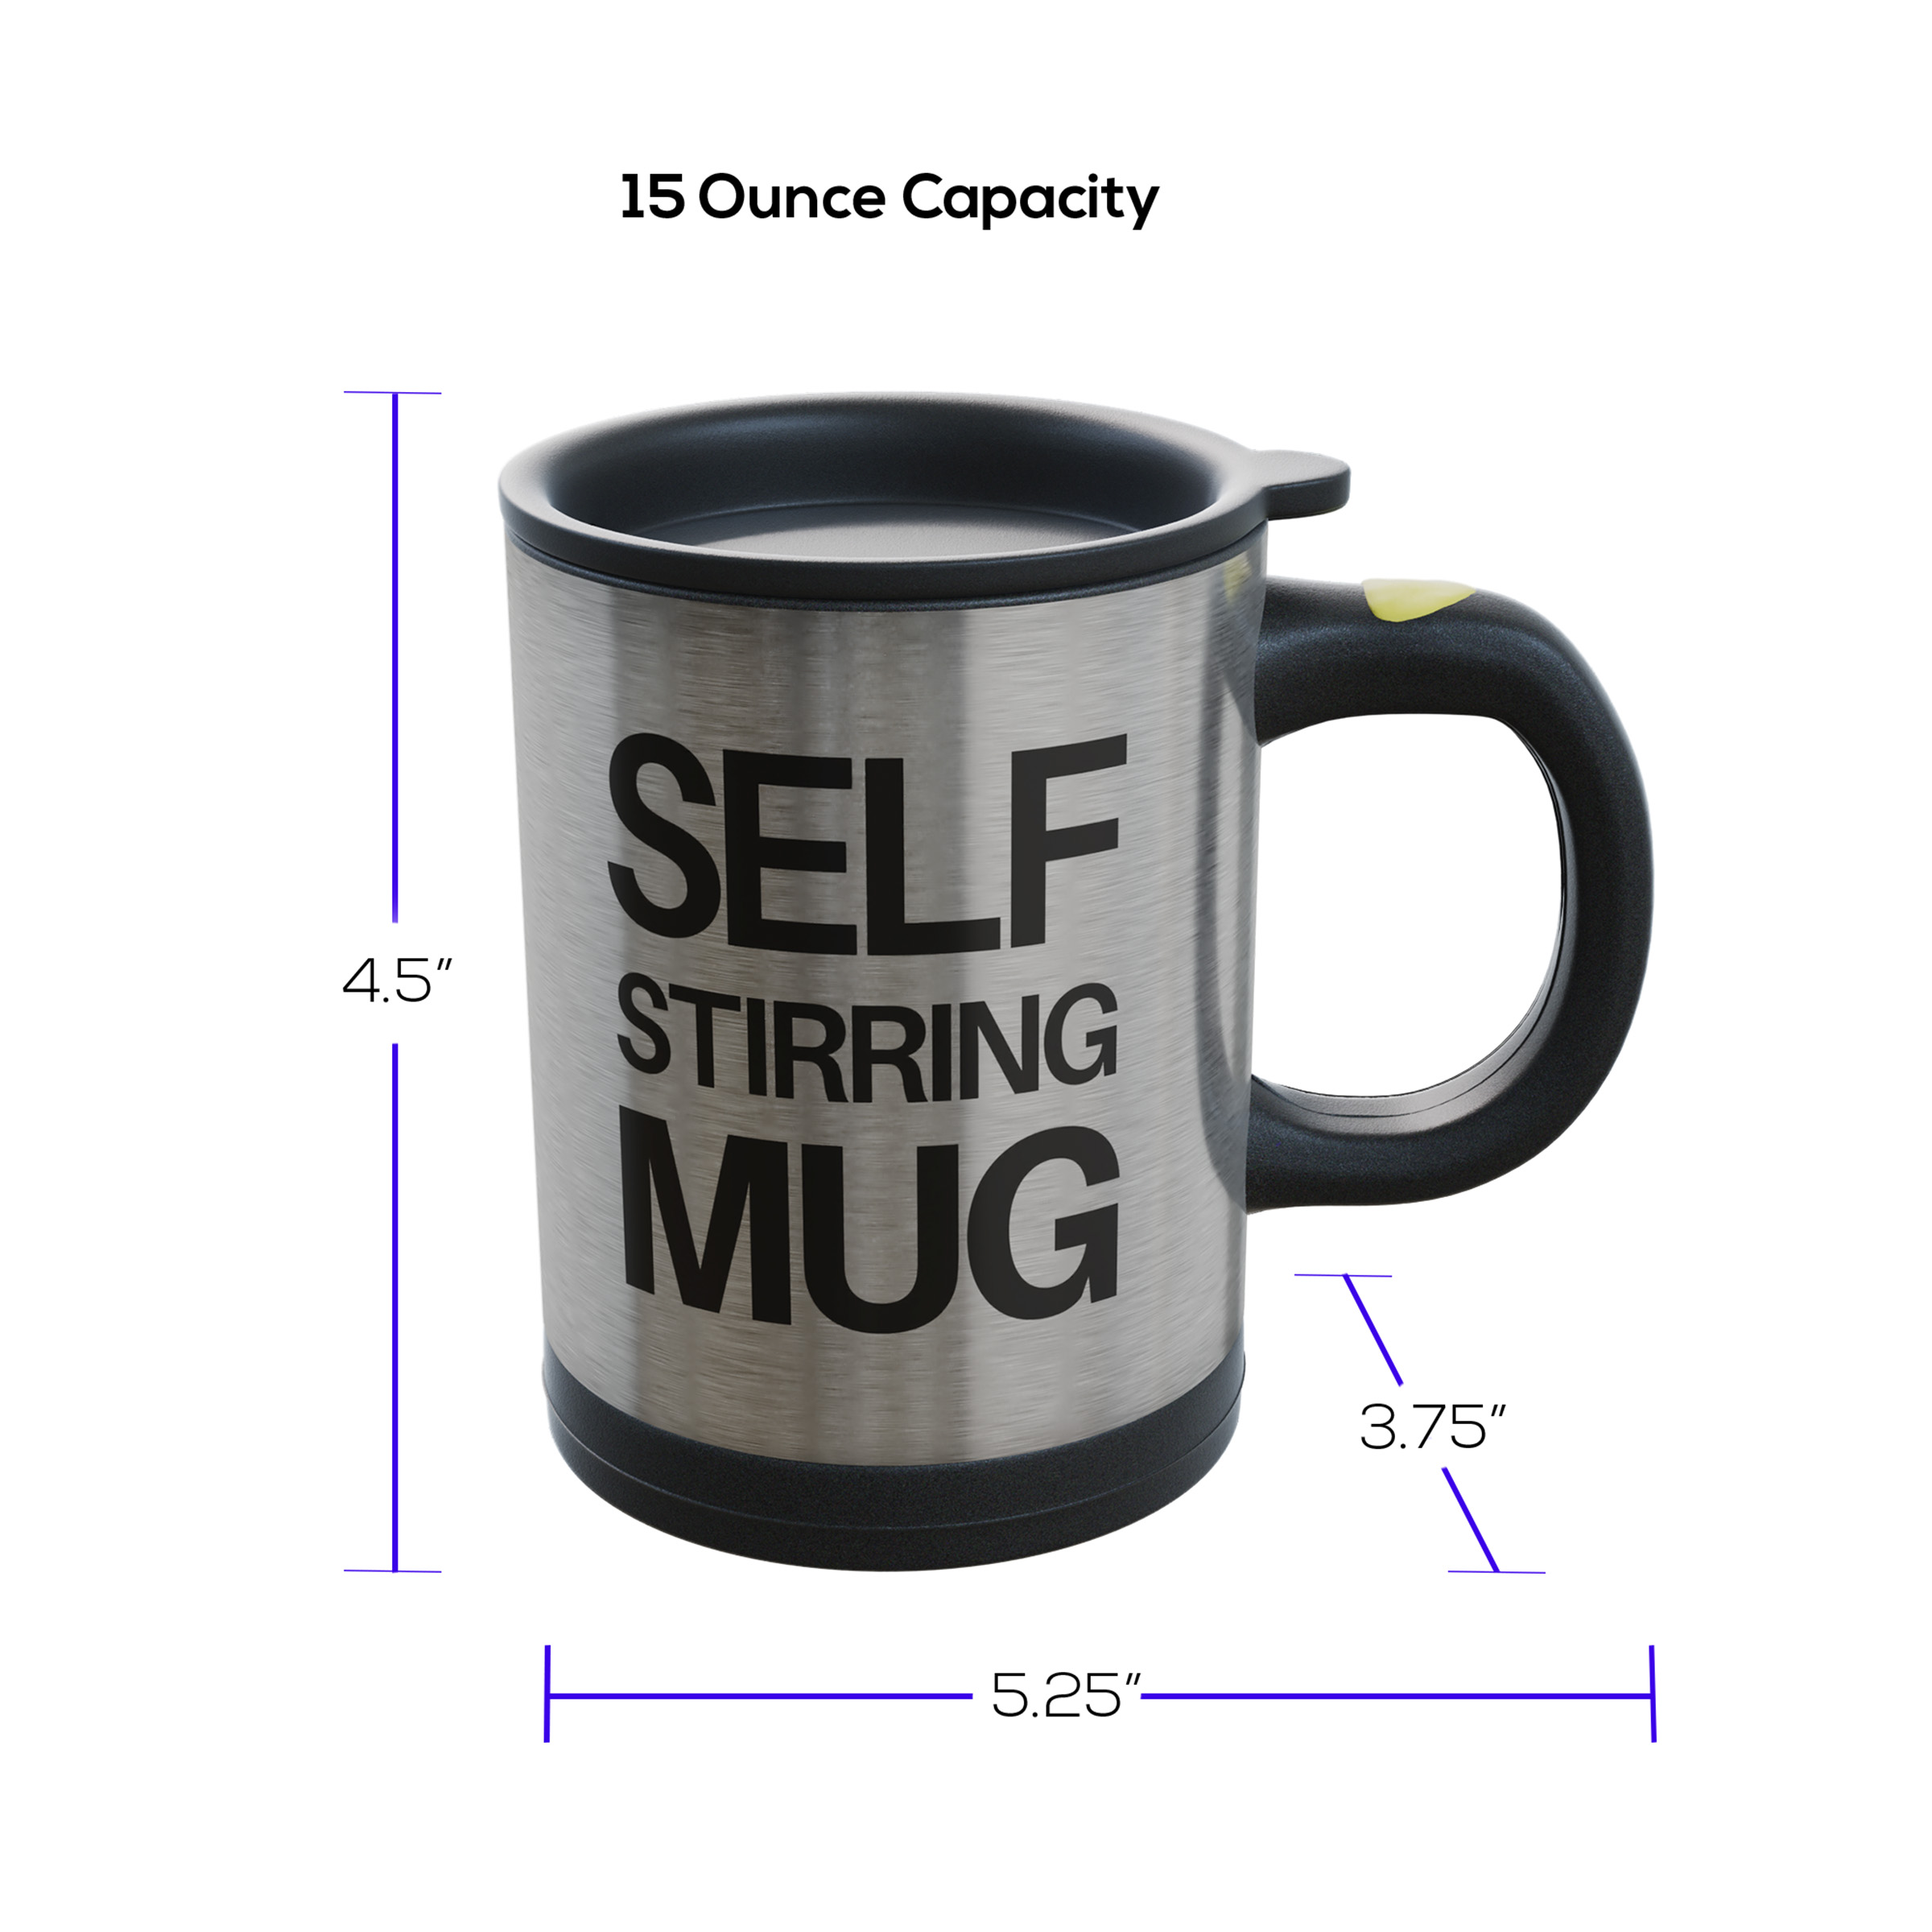 Self Stirring Mug- Reusable Auto Mixing Cup with Travel Lid for Protein Mix, Bulletproof Coffee, Chocolate Milk, Hot Cocoa by Chef Buddy, 15 ozChef Buddy Self Stirring Coffee Hot Chocolate - image 2 of 6